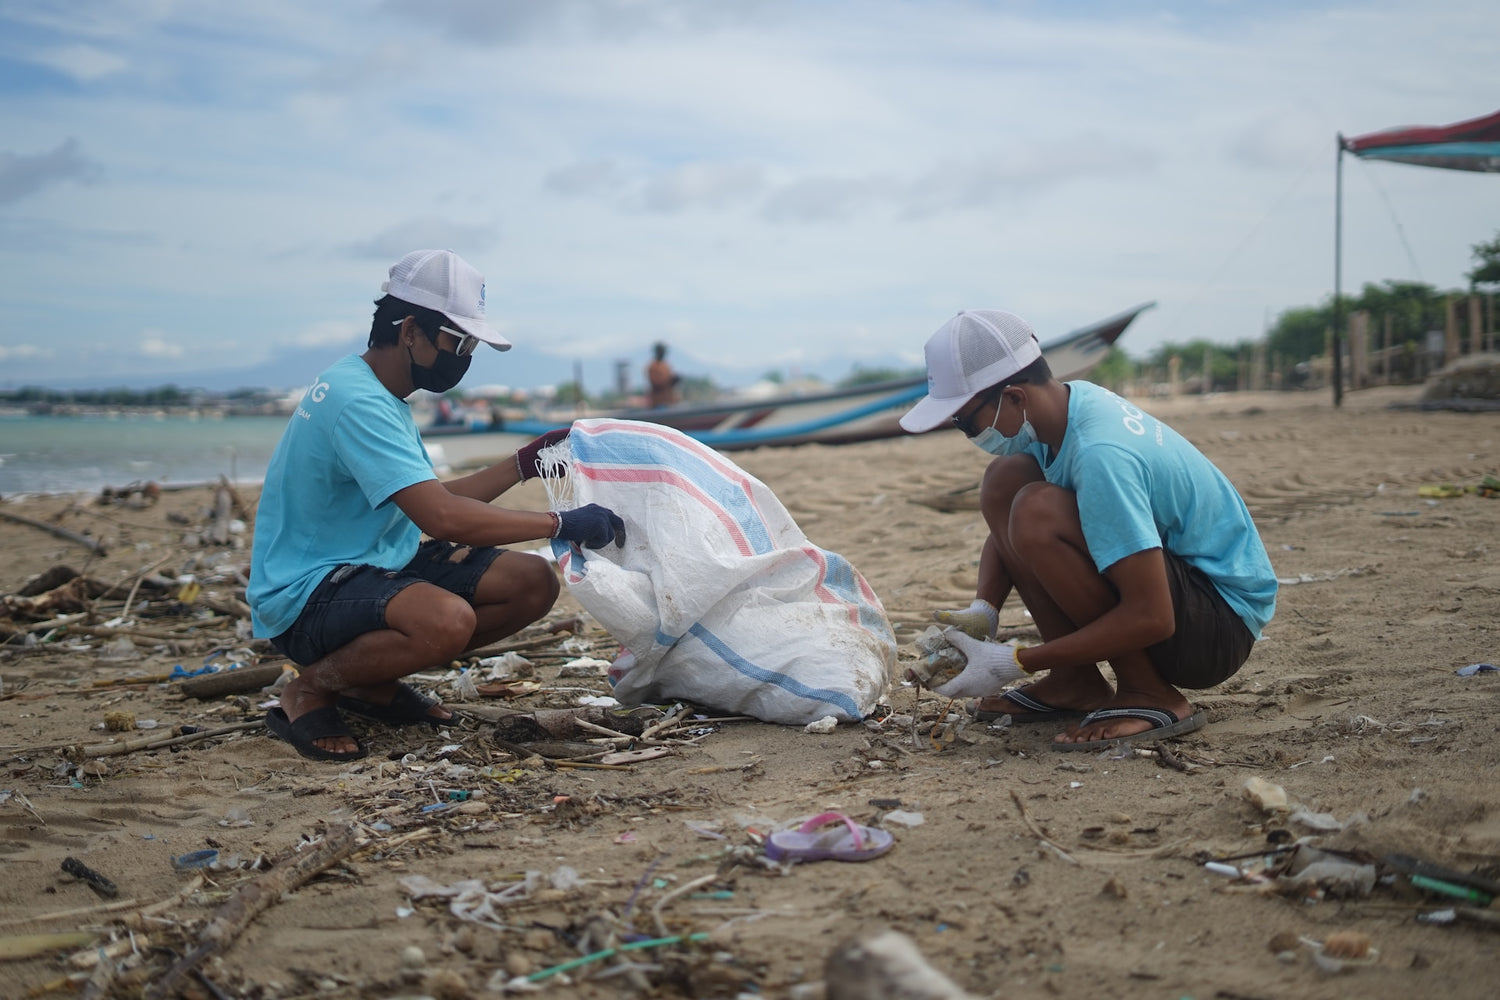 Two men in blue shirts recycling plastic waste on a beach in Asia